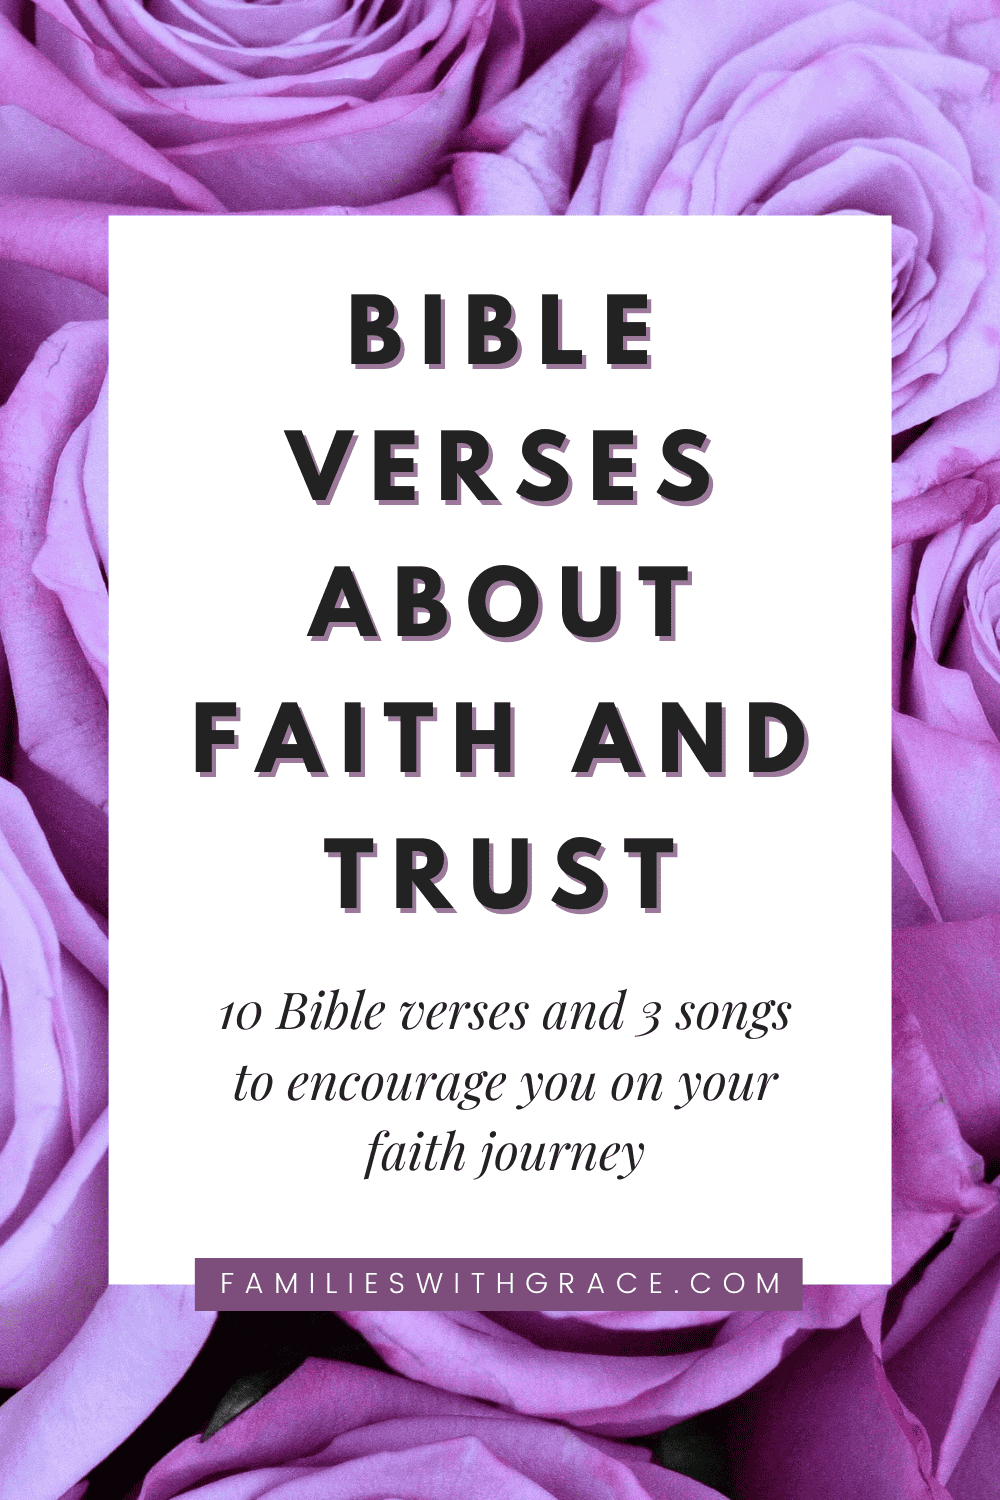 Bible verses about faith and trust